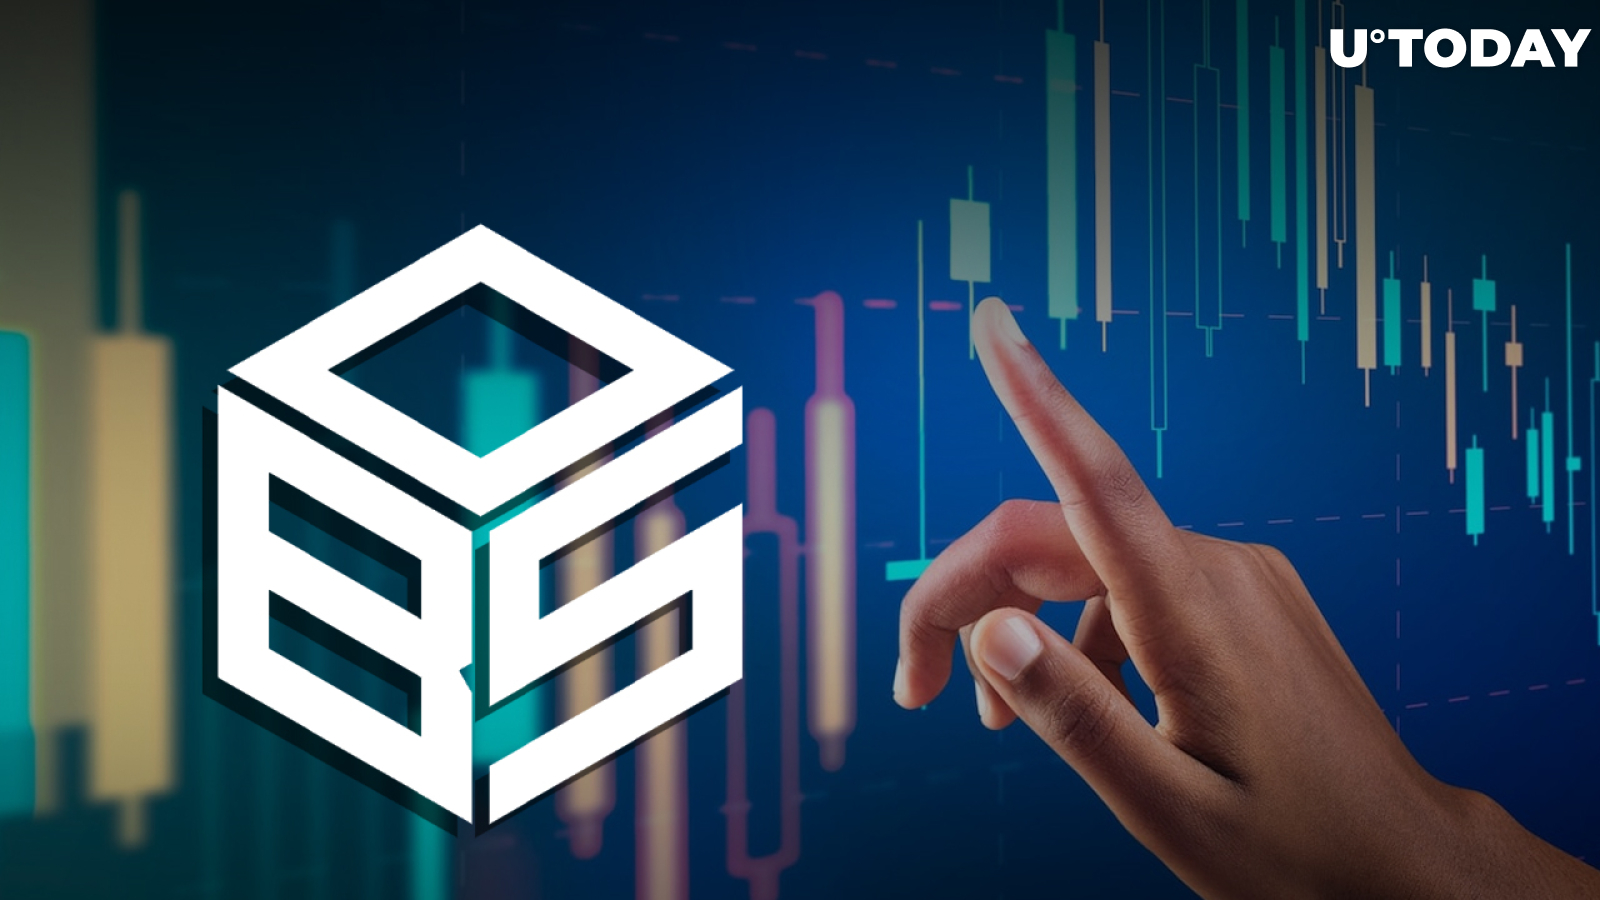 "Best Trading Opportunity Ever" Says Blockware Analyst, According to On-Chain Metrics